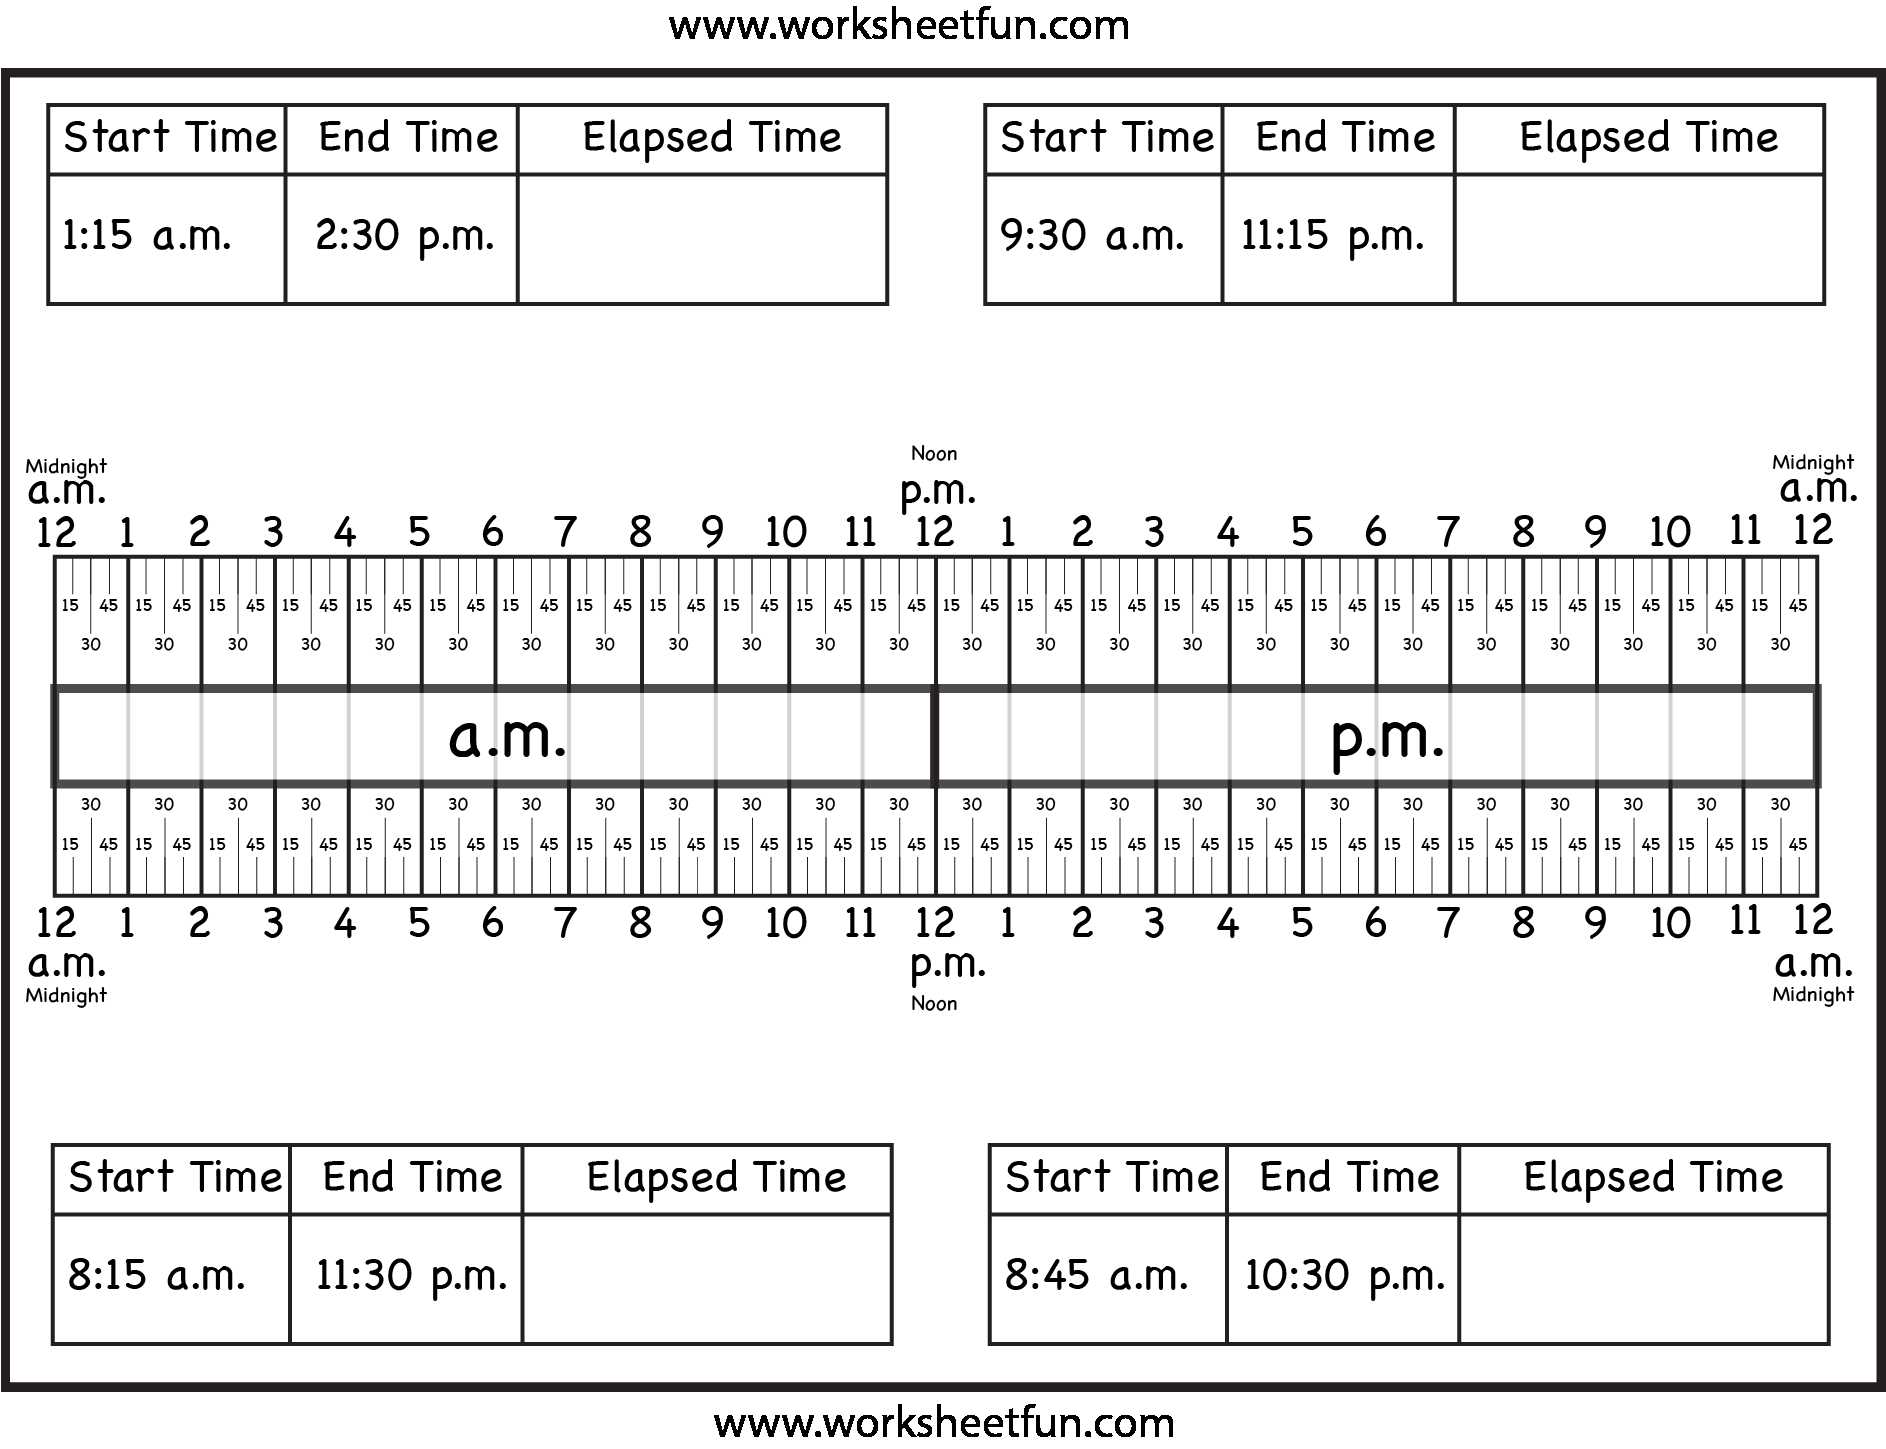 Learning to Tell the Time Worksheets together with Calculate Elapsed Time Using Elapsed Time Ruler – Quarter Hours 15